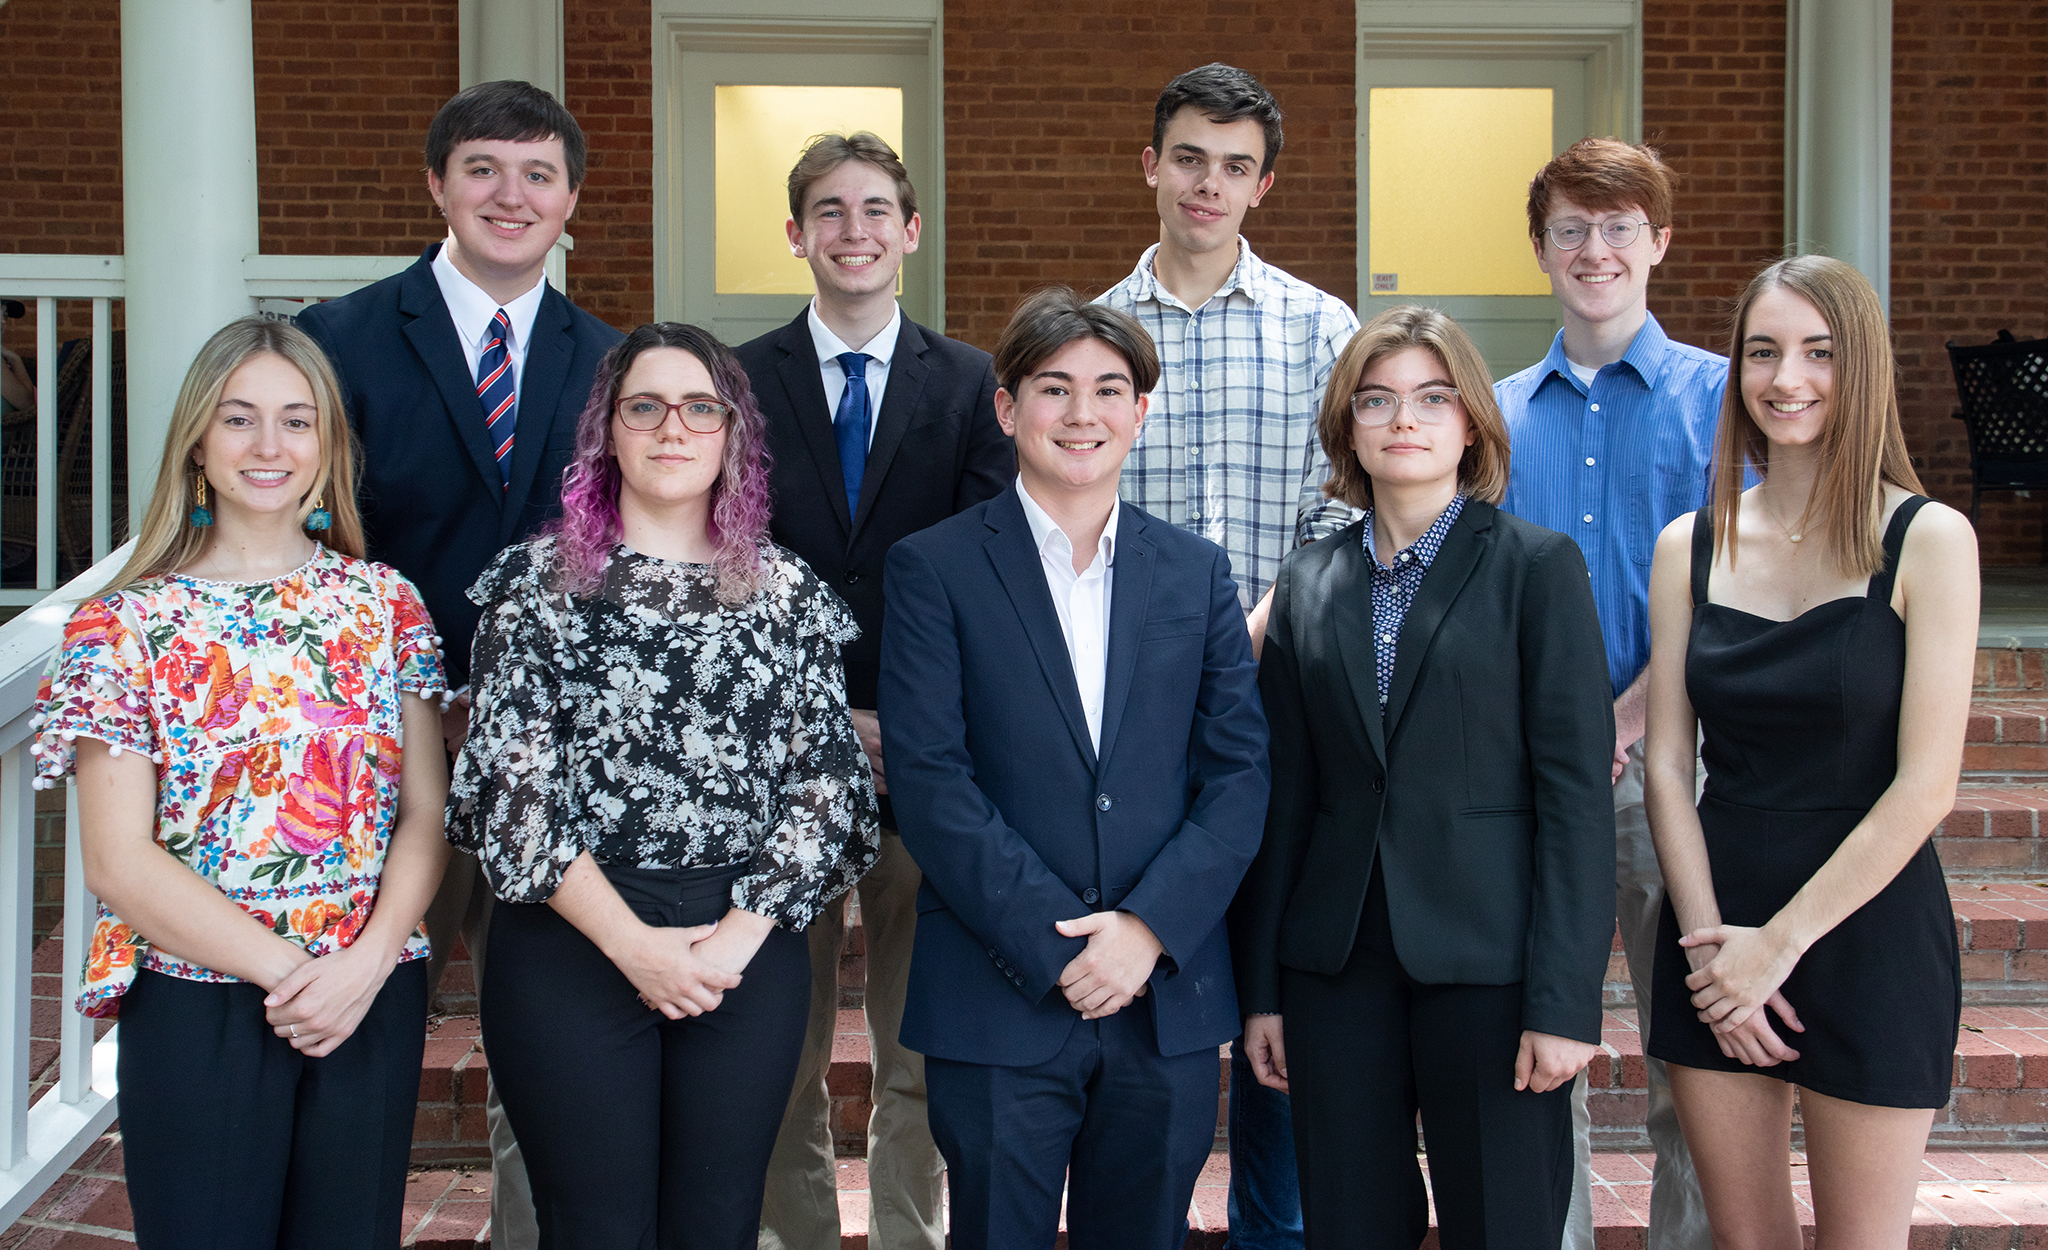 The 2022-23 Croft Scholars are (front, from left) Lily Schauwecker, Abigail Shaw, John Amburgy, Claudia Guske and Sophia Prost, and (back) Calloway Bills, Colin Richardson, Will Devenish and Nathan Guy. Croft Scholarships are among the largest and most prestigious at the university. Submitted photo